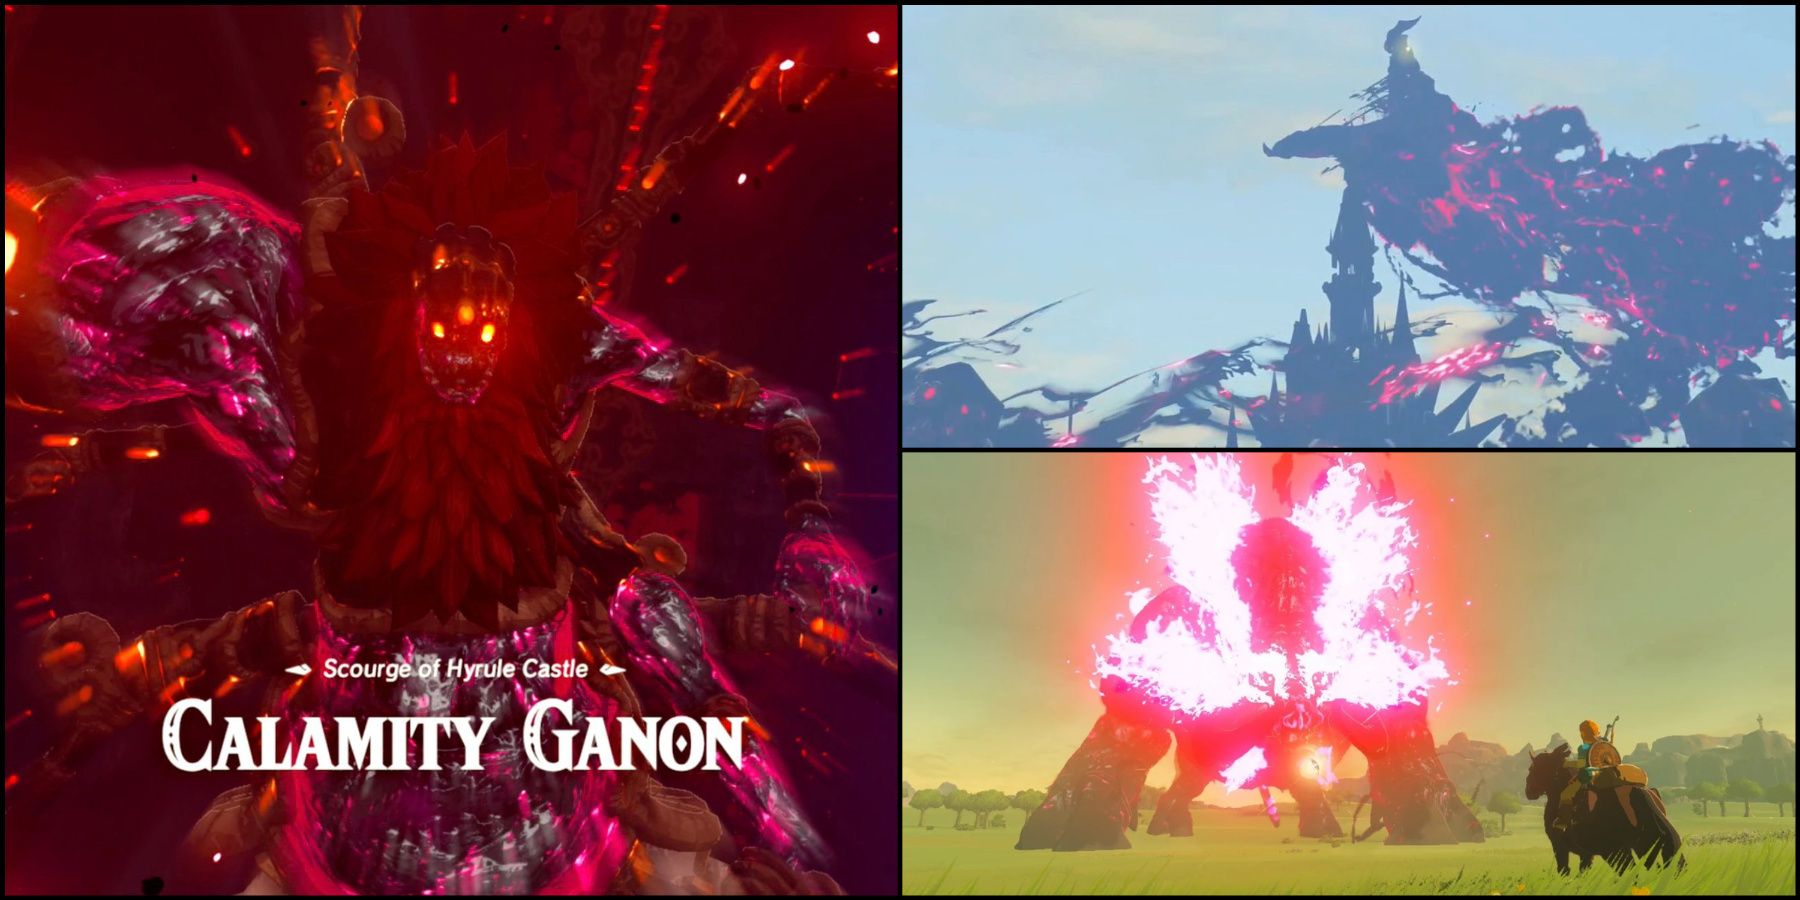 Ganon's various forms in Breath of the Wild